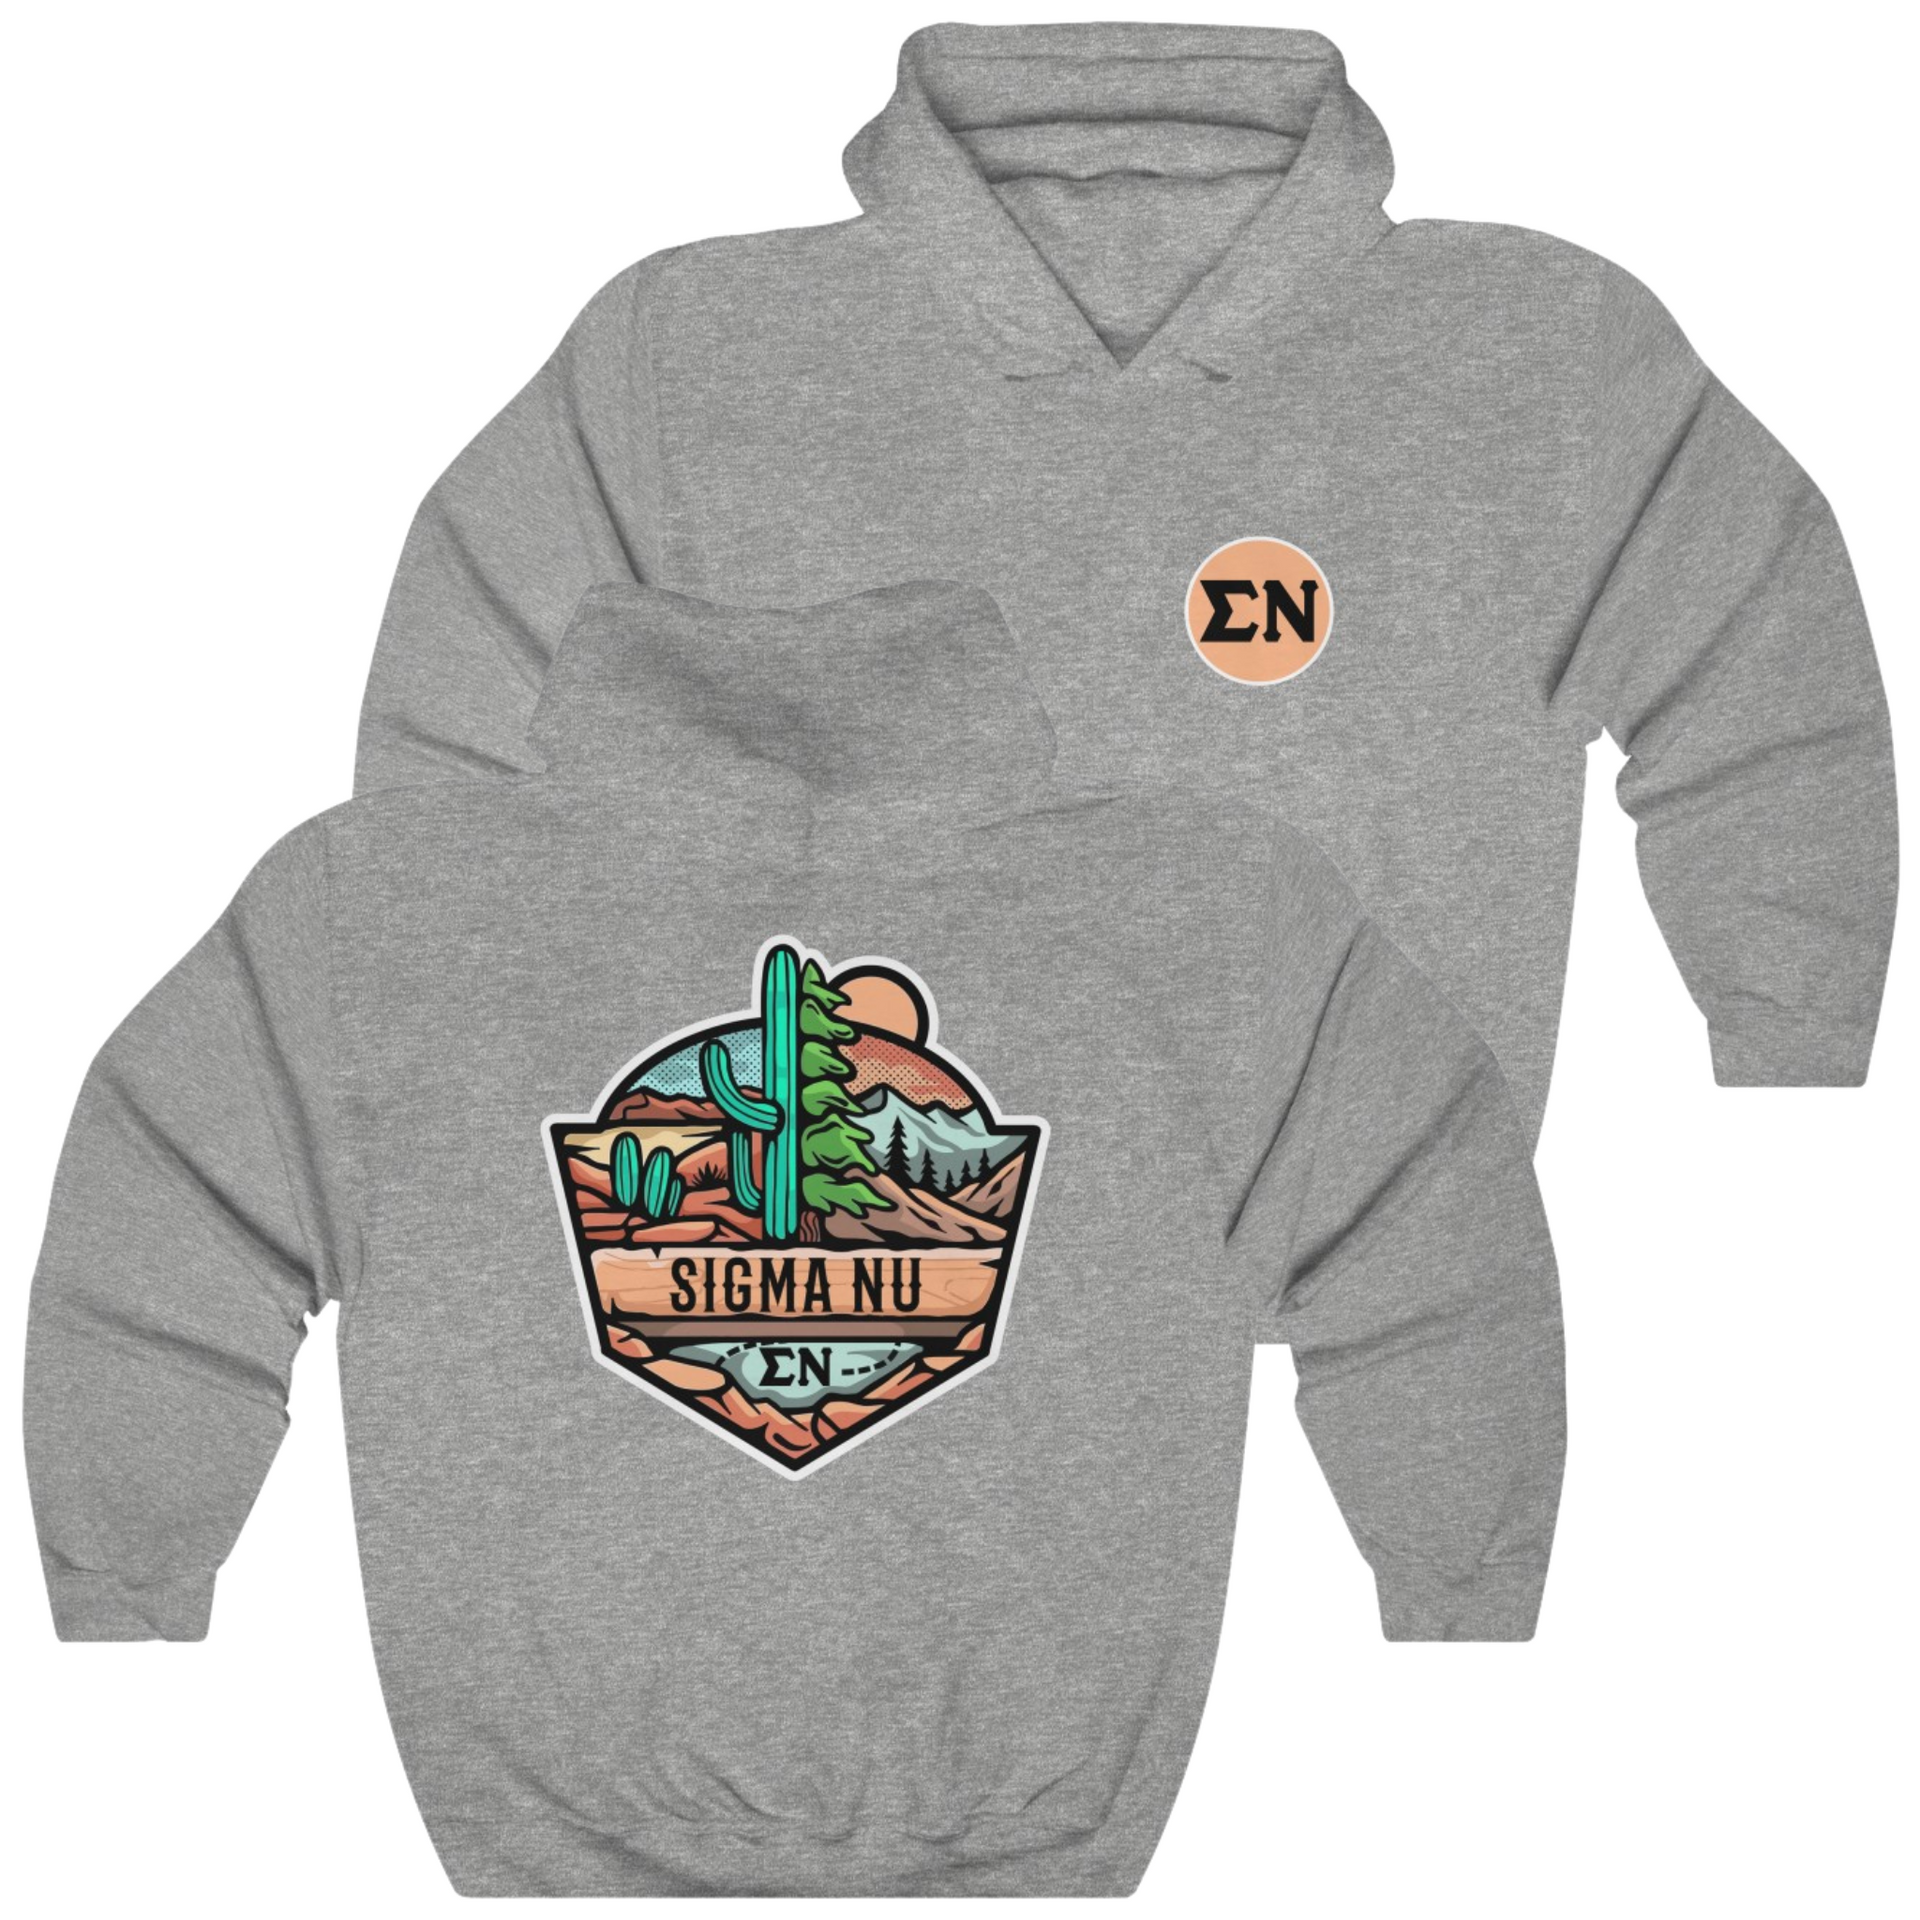 Grey Sigma Nu Graphic Hoodie | Desert Mountains | Sigma Nu Clothing, Apparel and Merchandise